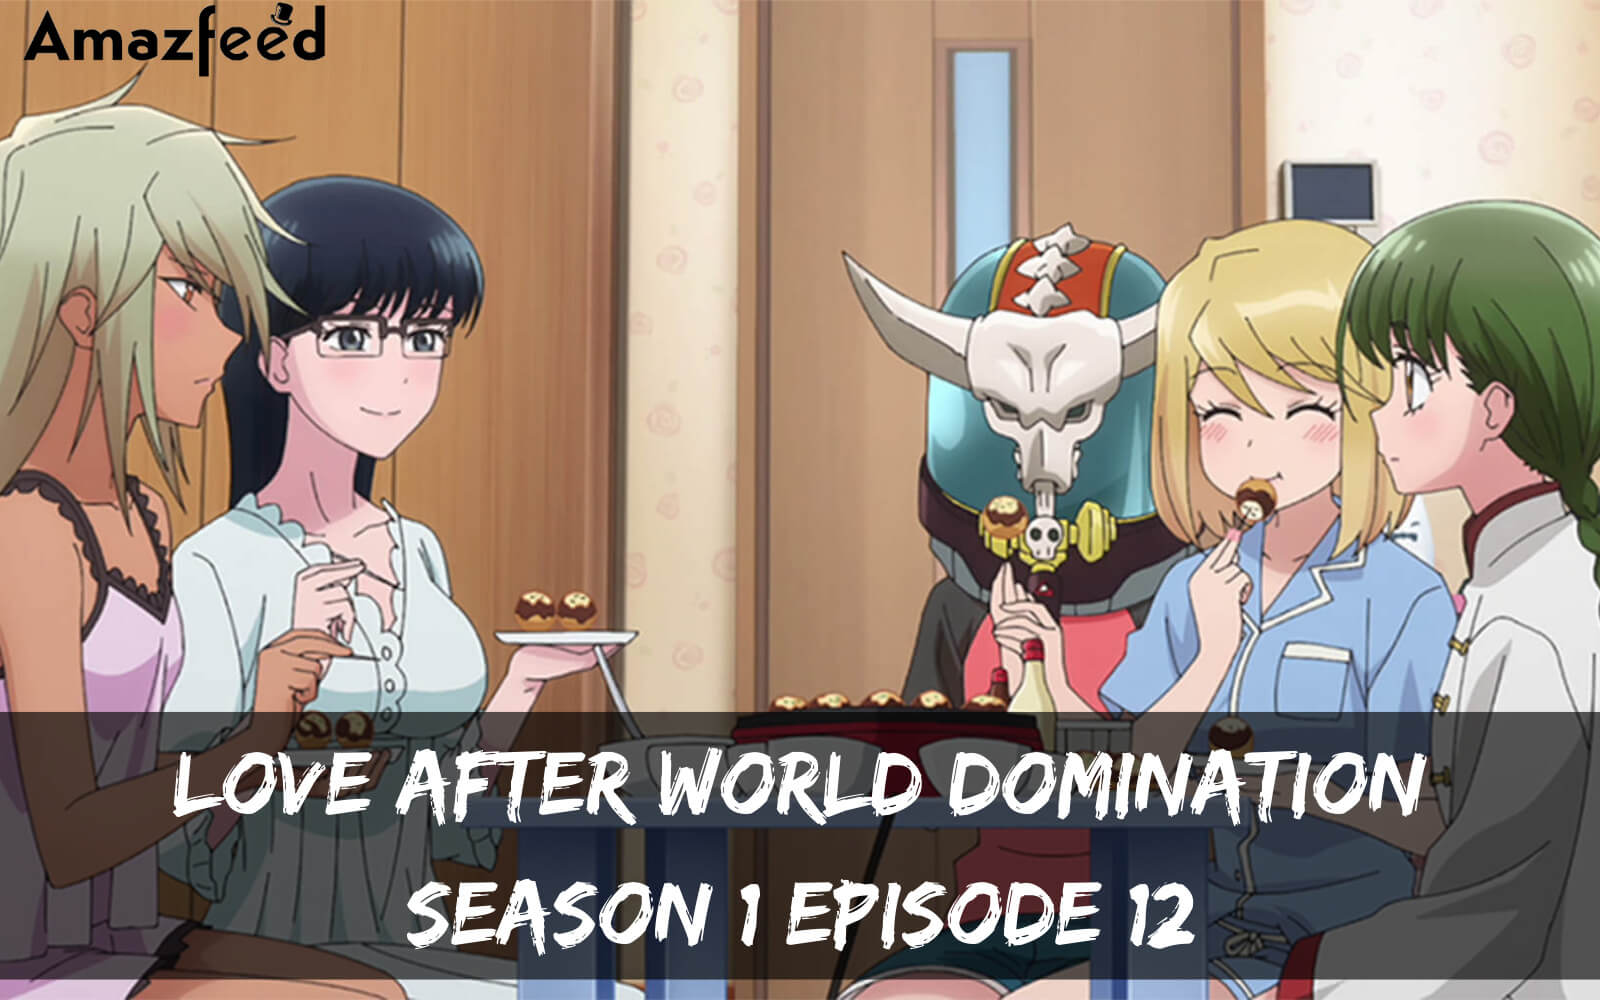 Love After World Domination season 1 Episode 12 release date - Copy